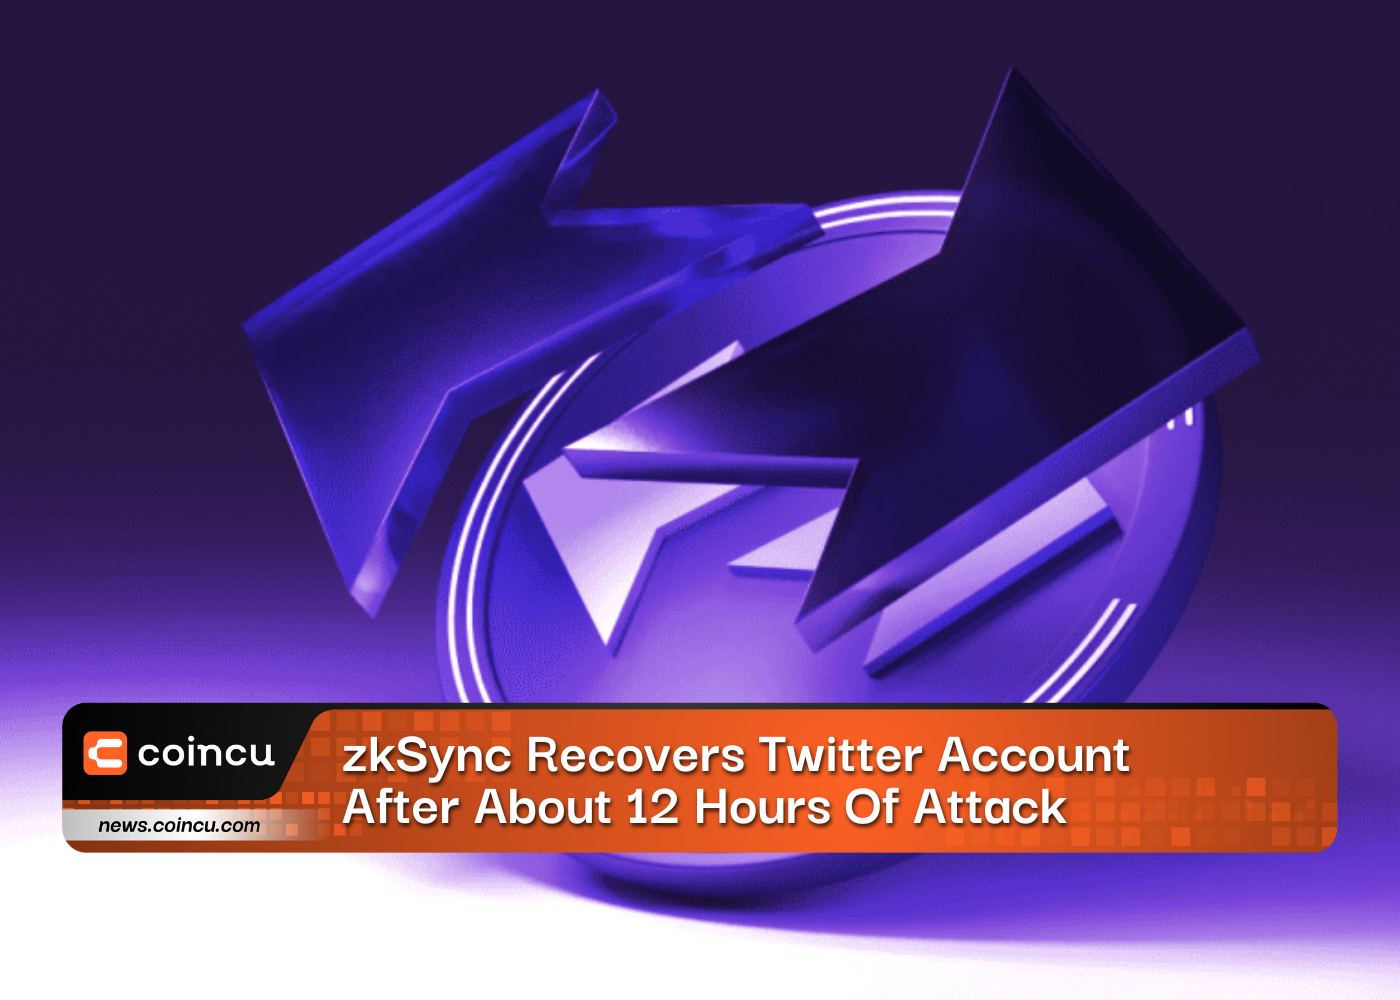 zkSync Recovers Twitter Account After About 12 Hours Of Attack